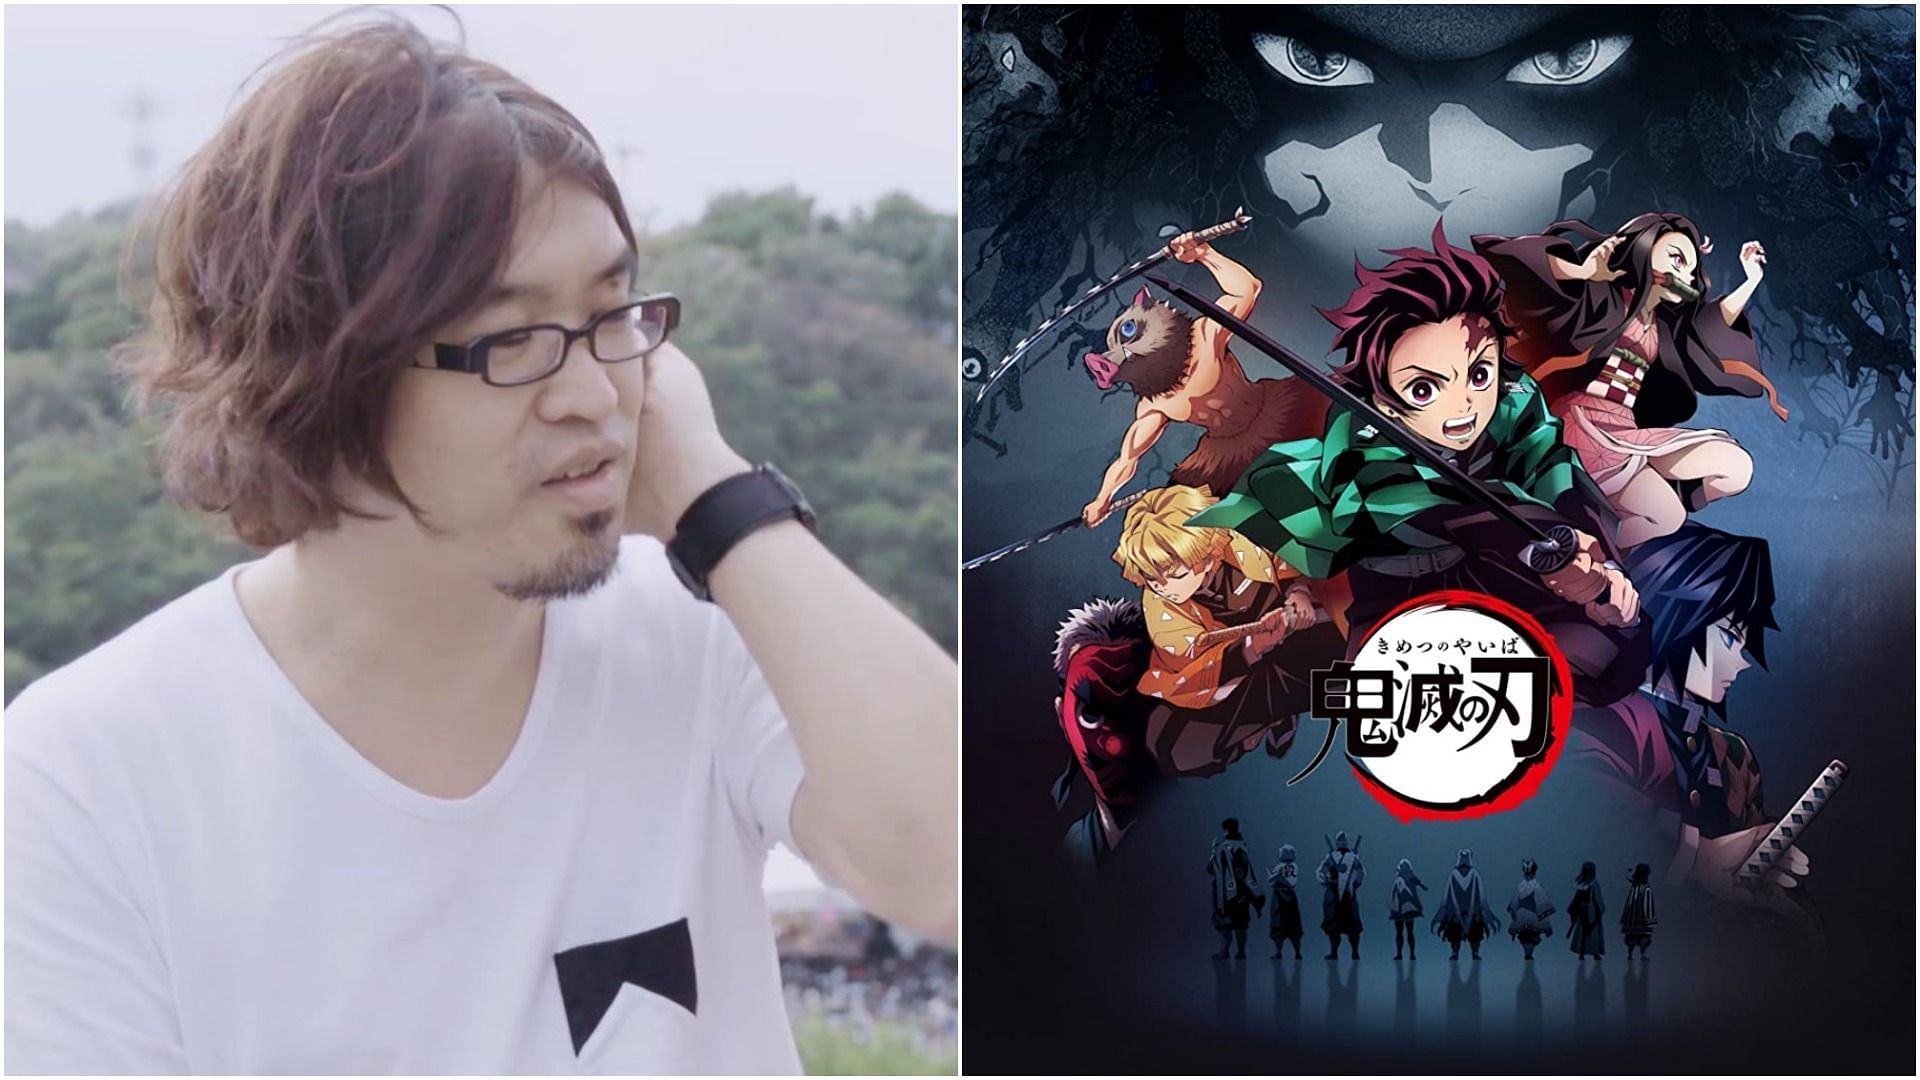 Founder of Demon Slayer production company, Ufotable, sentenced to prison for 20 months on account of tax evasion (Images via IMDB and Twitter/@KaroshiMyriad)